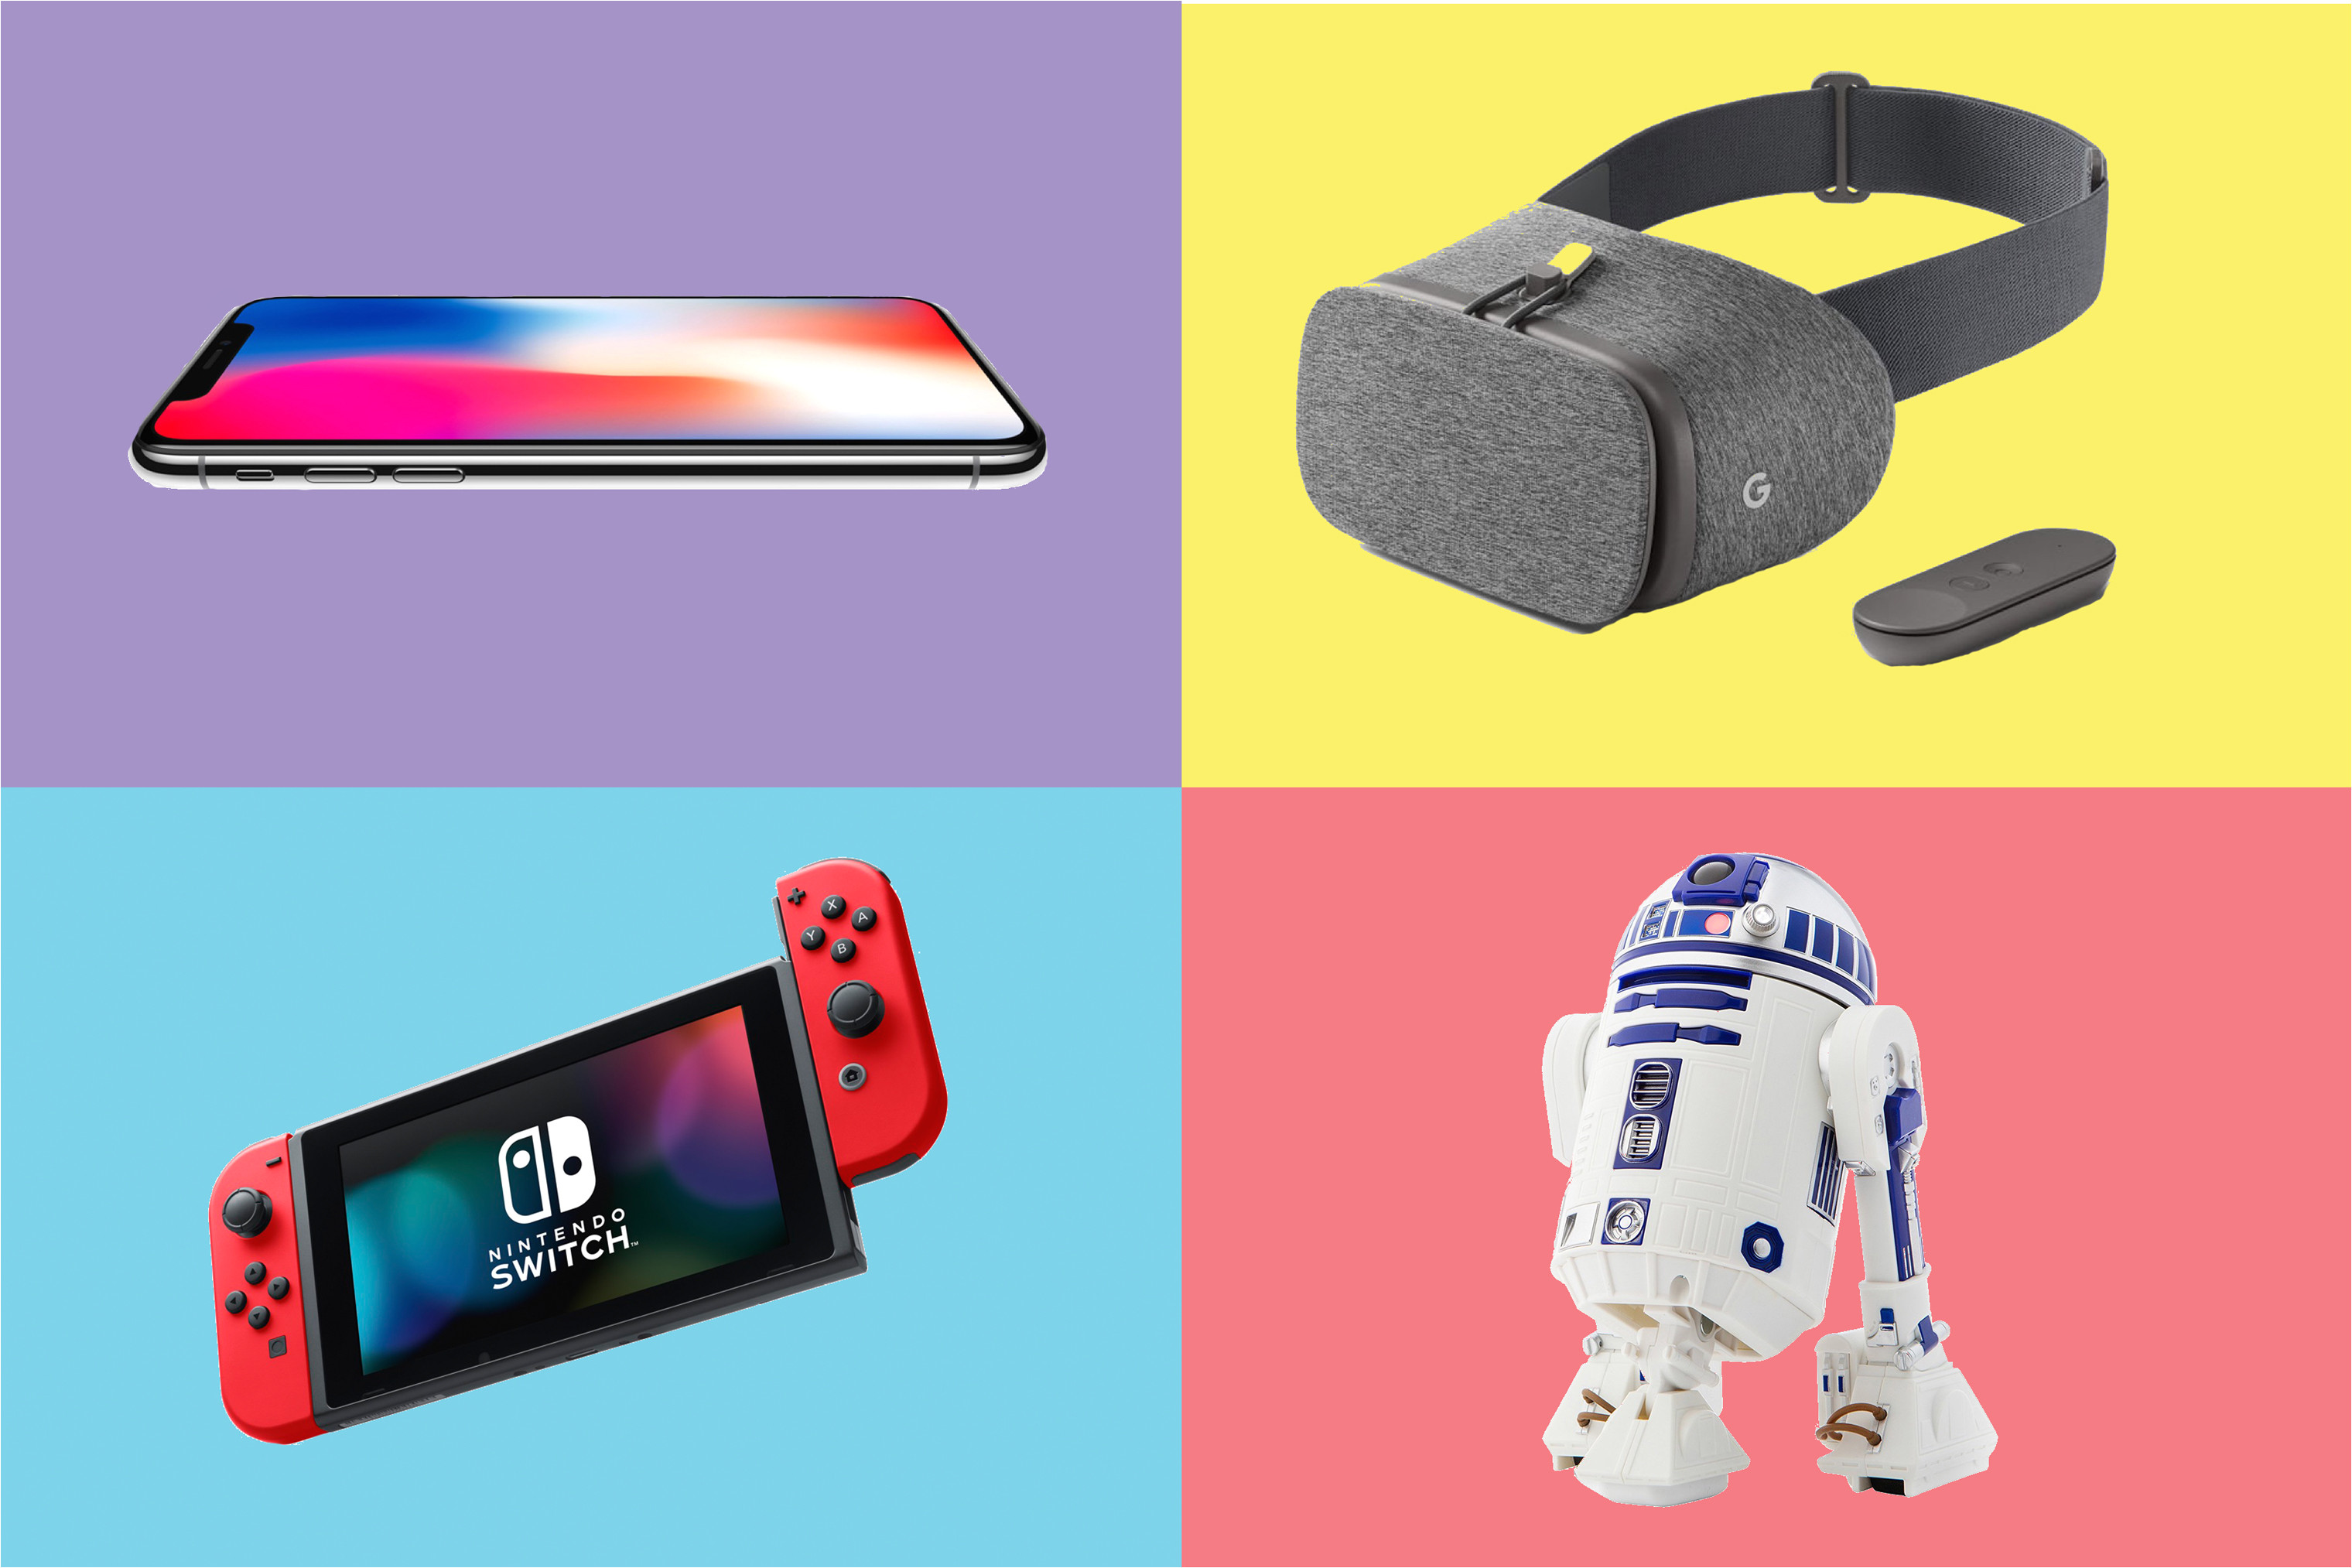 30 ultimate tech gifts for every person on your holiday shopping list